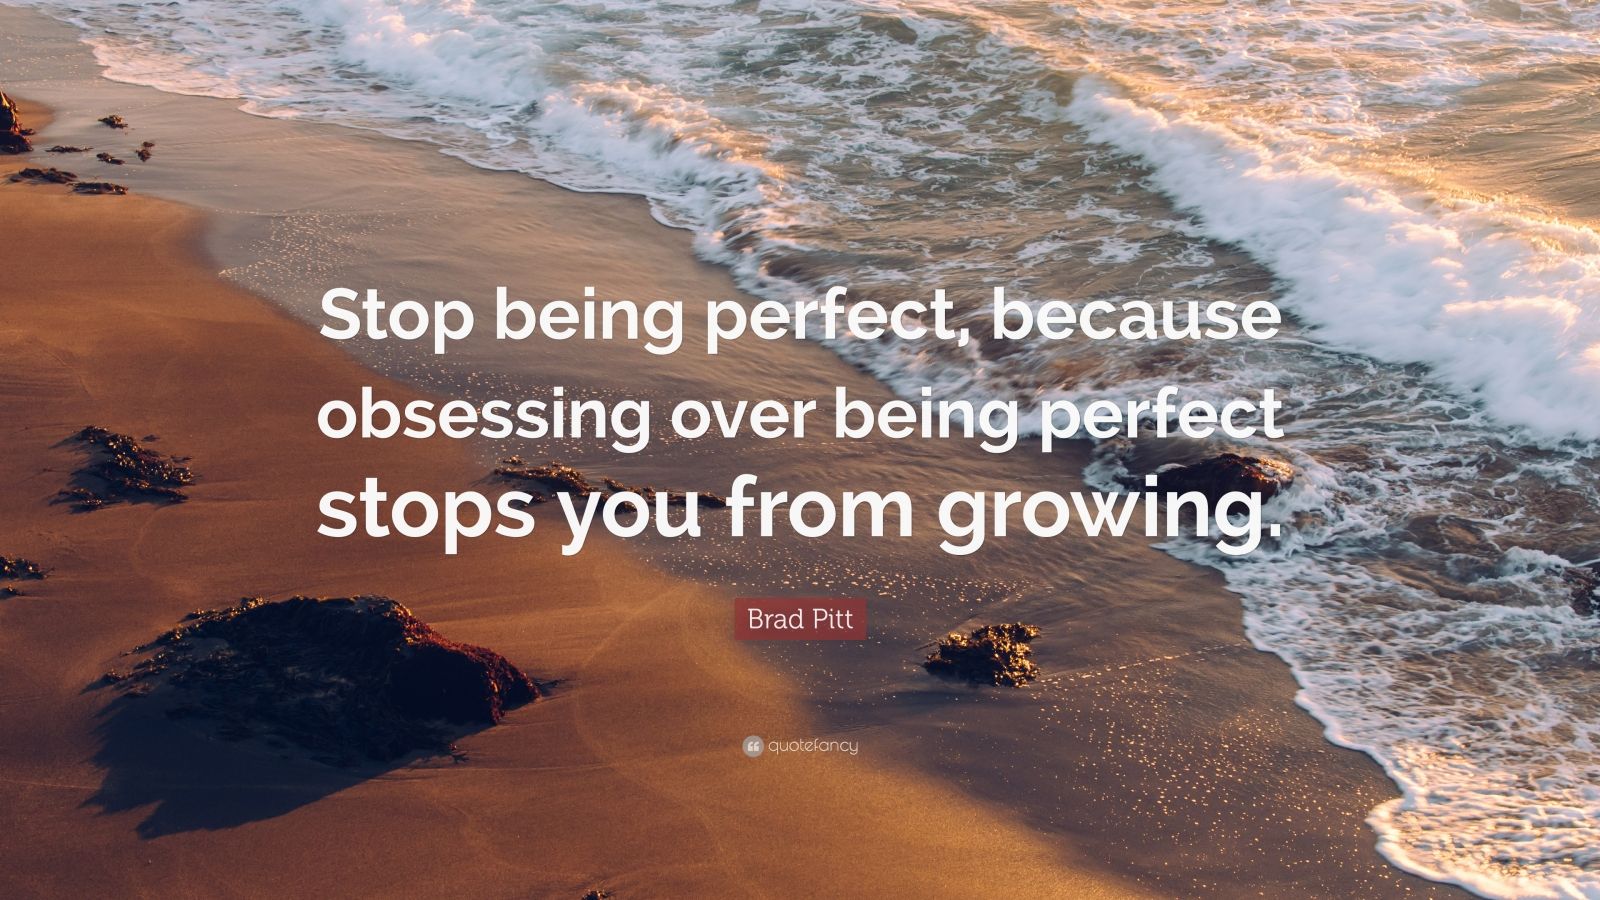 Brad Pitt Quote: “Stop being perfect, because obsessing over being ...